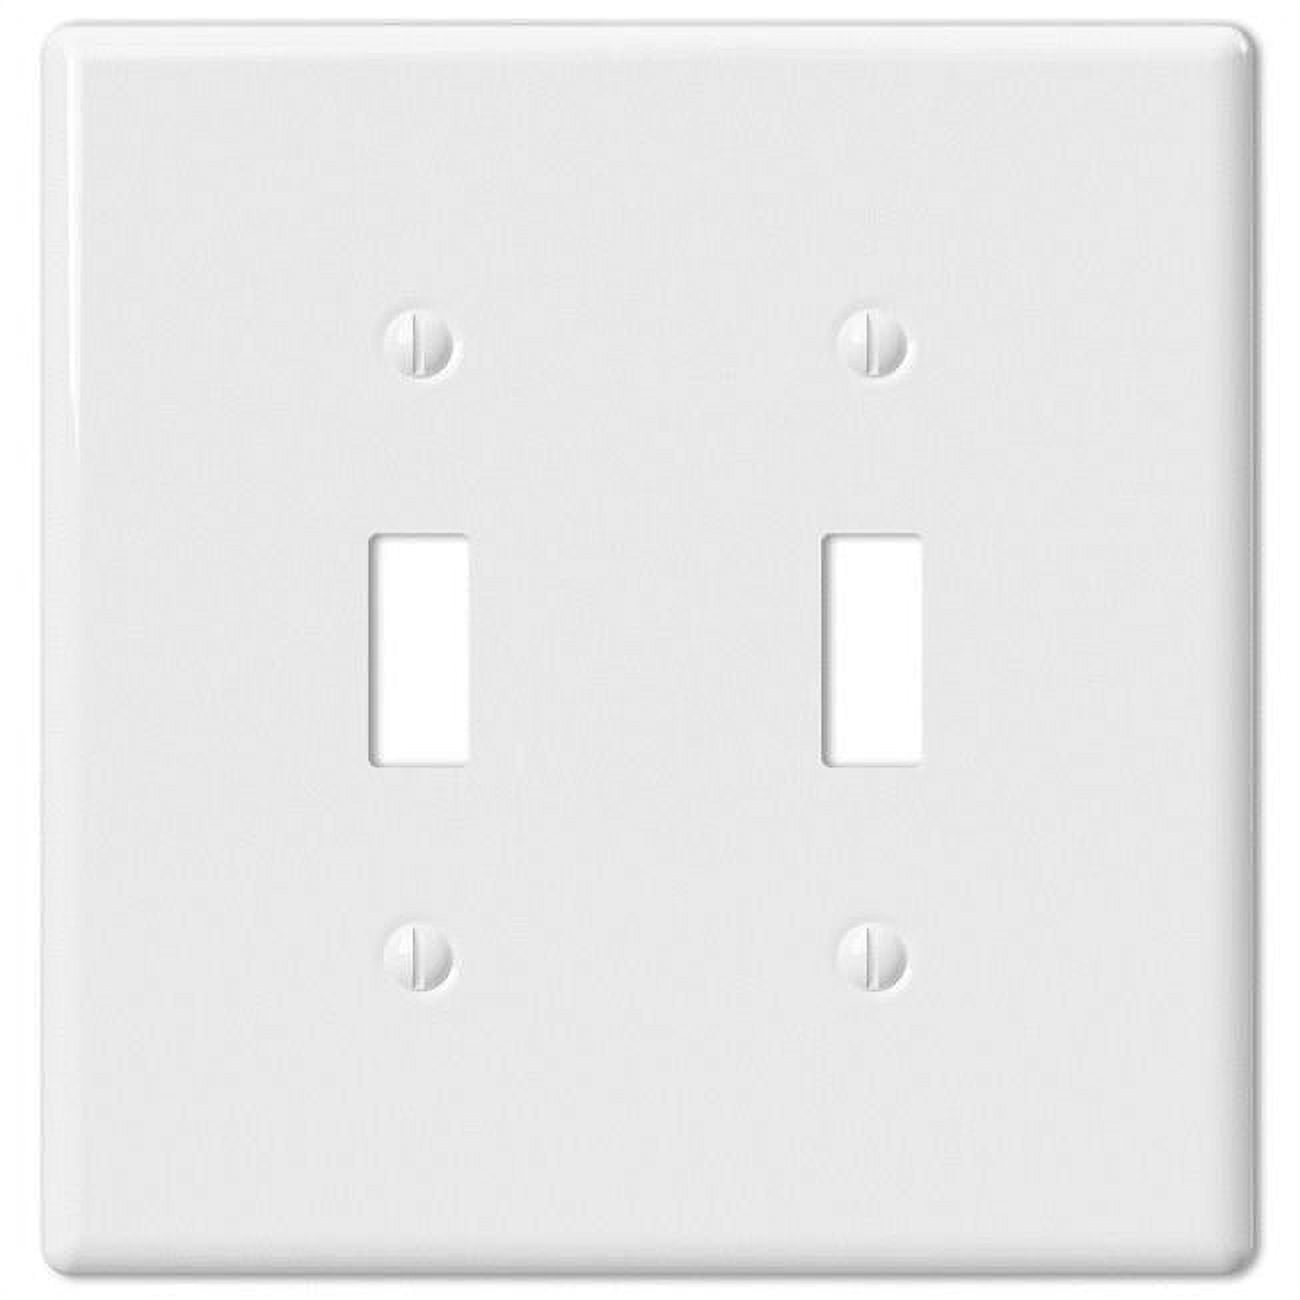 Picture of Amerelle 3003441 Metro White 2 Gang Ceramic Toggle Wall Plate